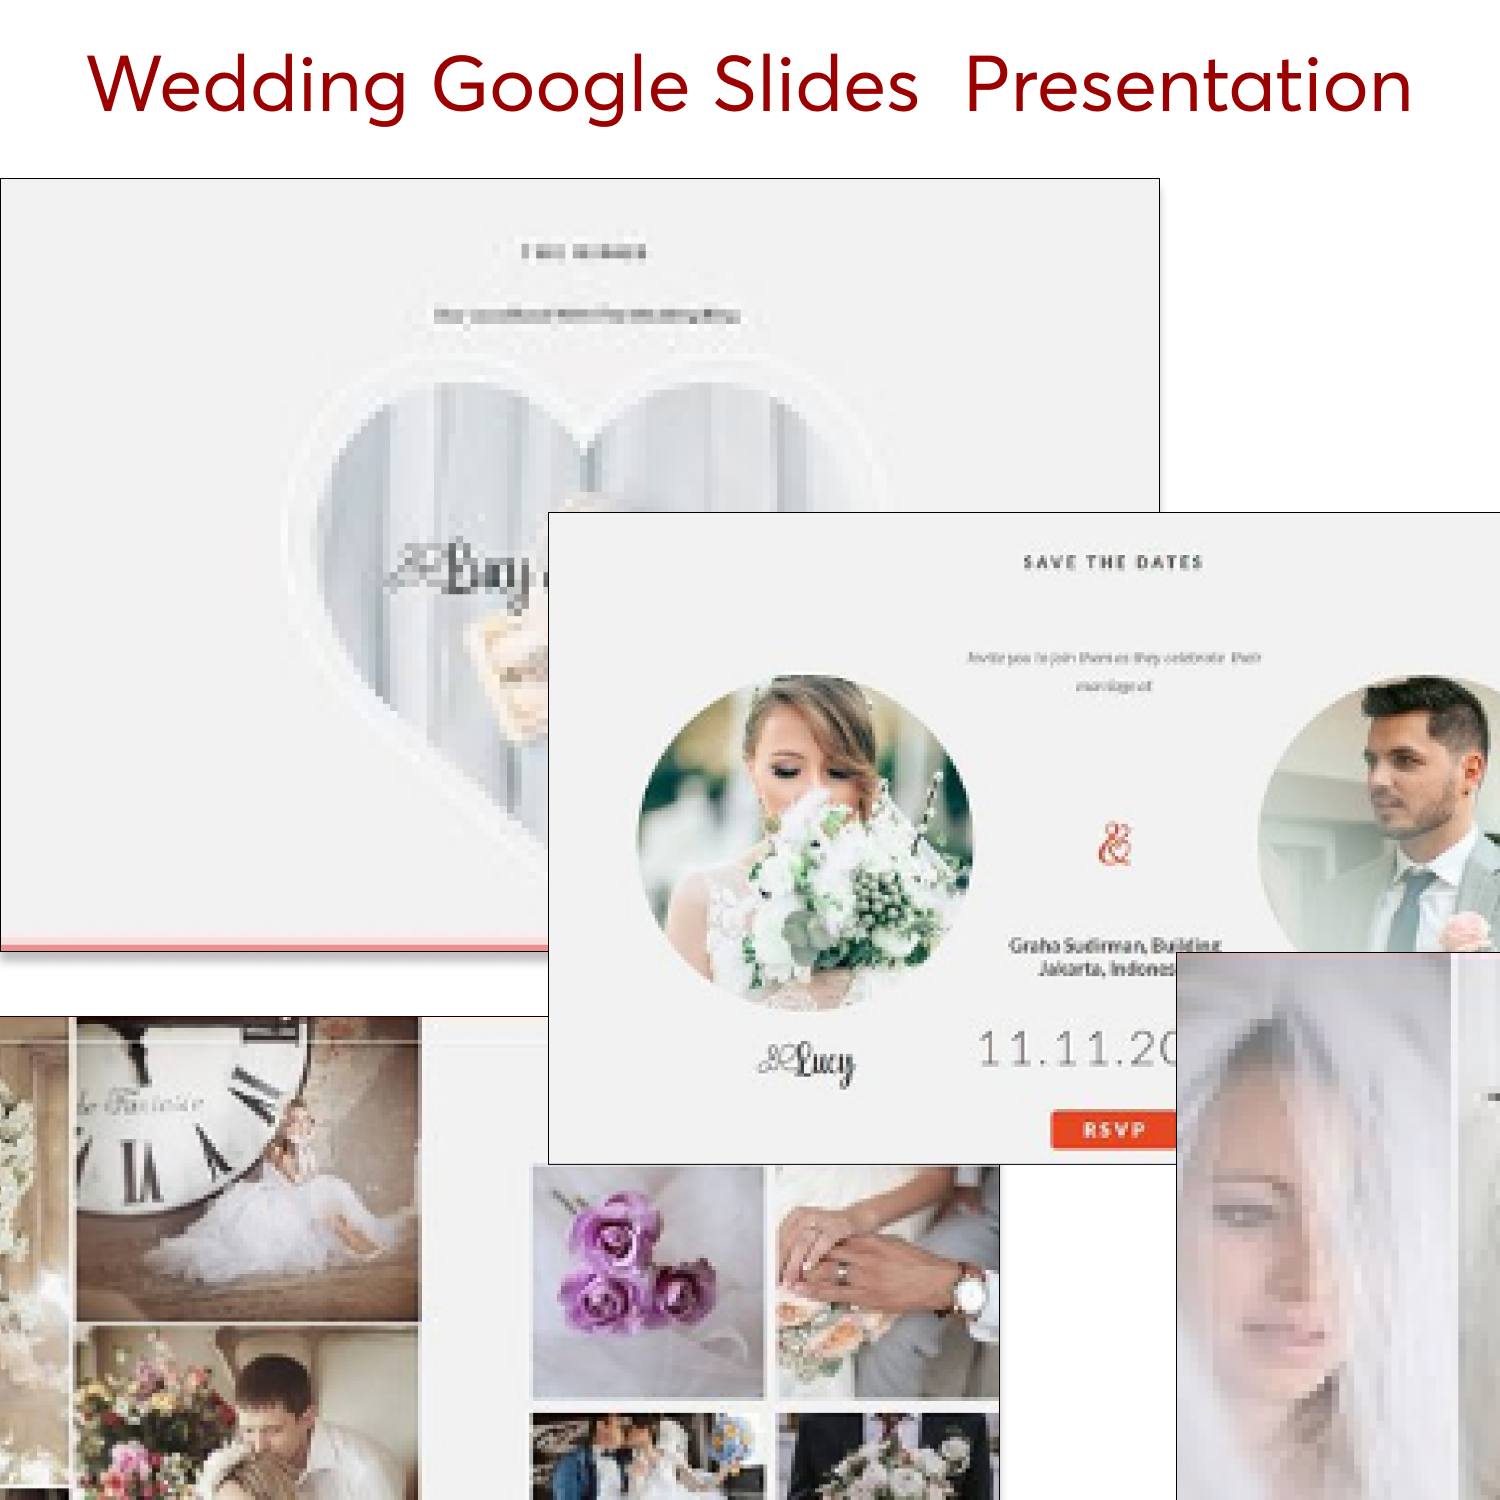 These are professional slides designed for your wedding events.